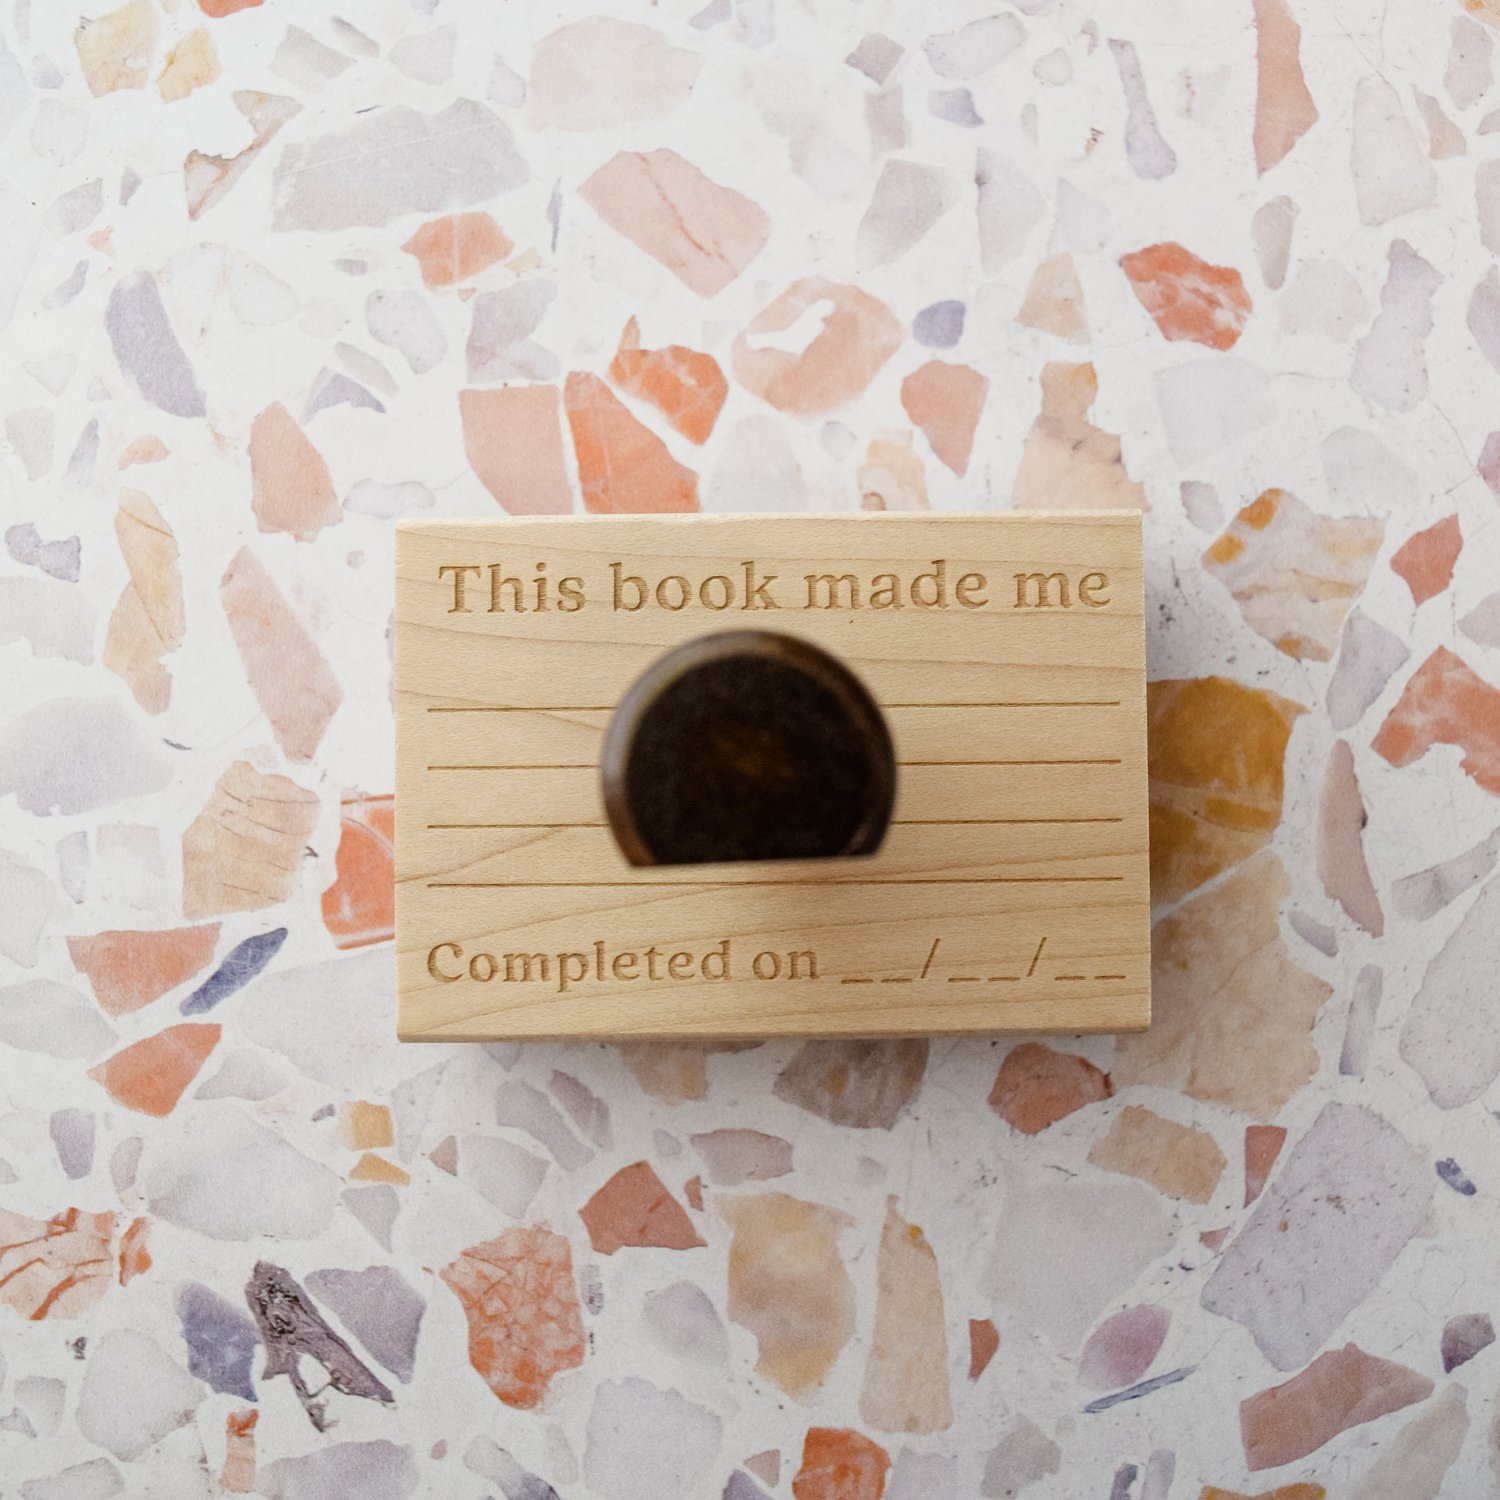 Book Journal Stamp, a Rubber Stamp for your Personal or Little